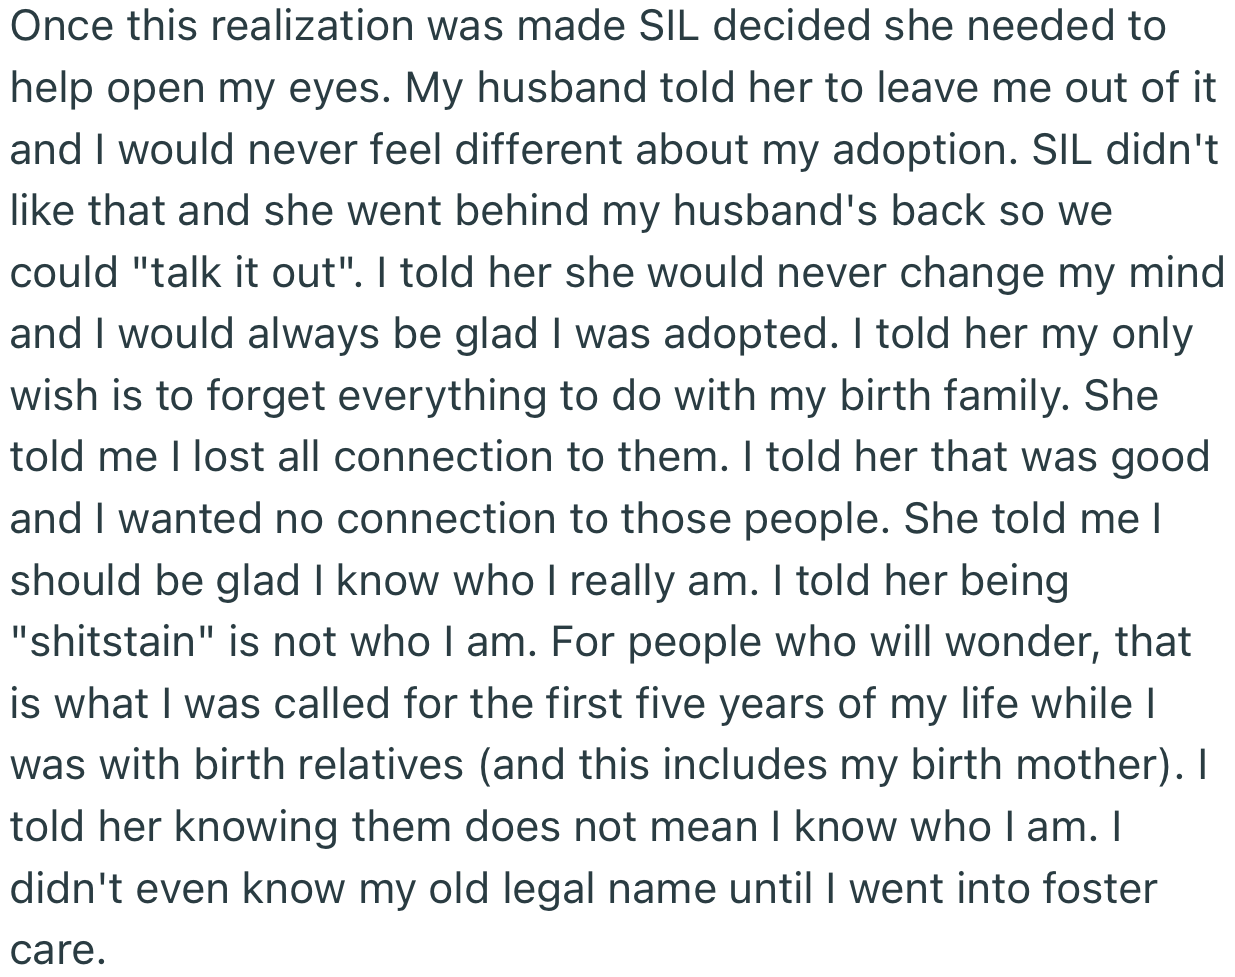 SIL went further to try to open OP’s eye’s to her own adoption story and birth family as a fellow adoptee. However, OP wasn’t willing to go back to the past